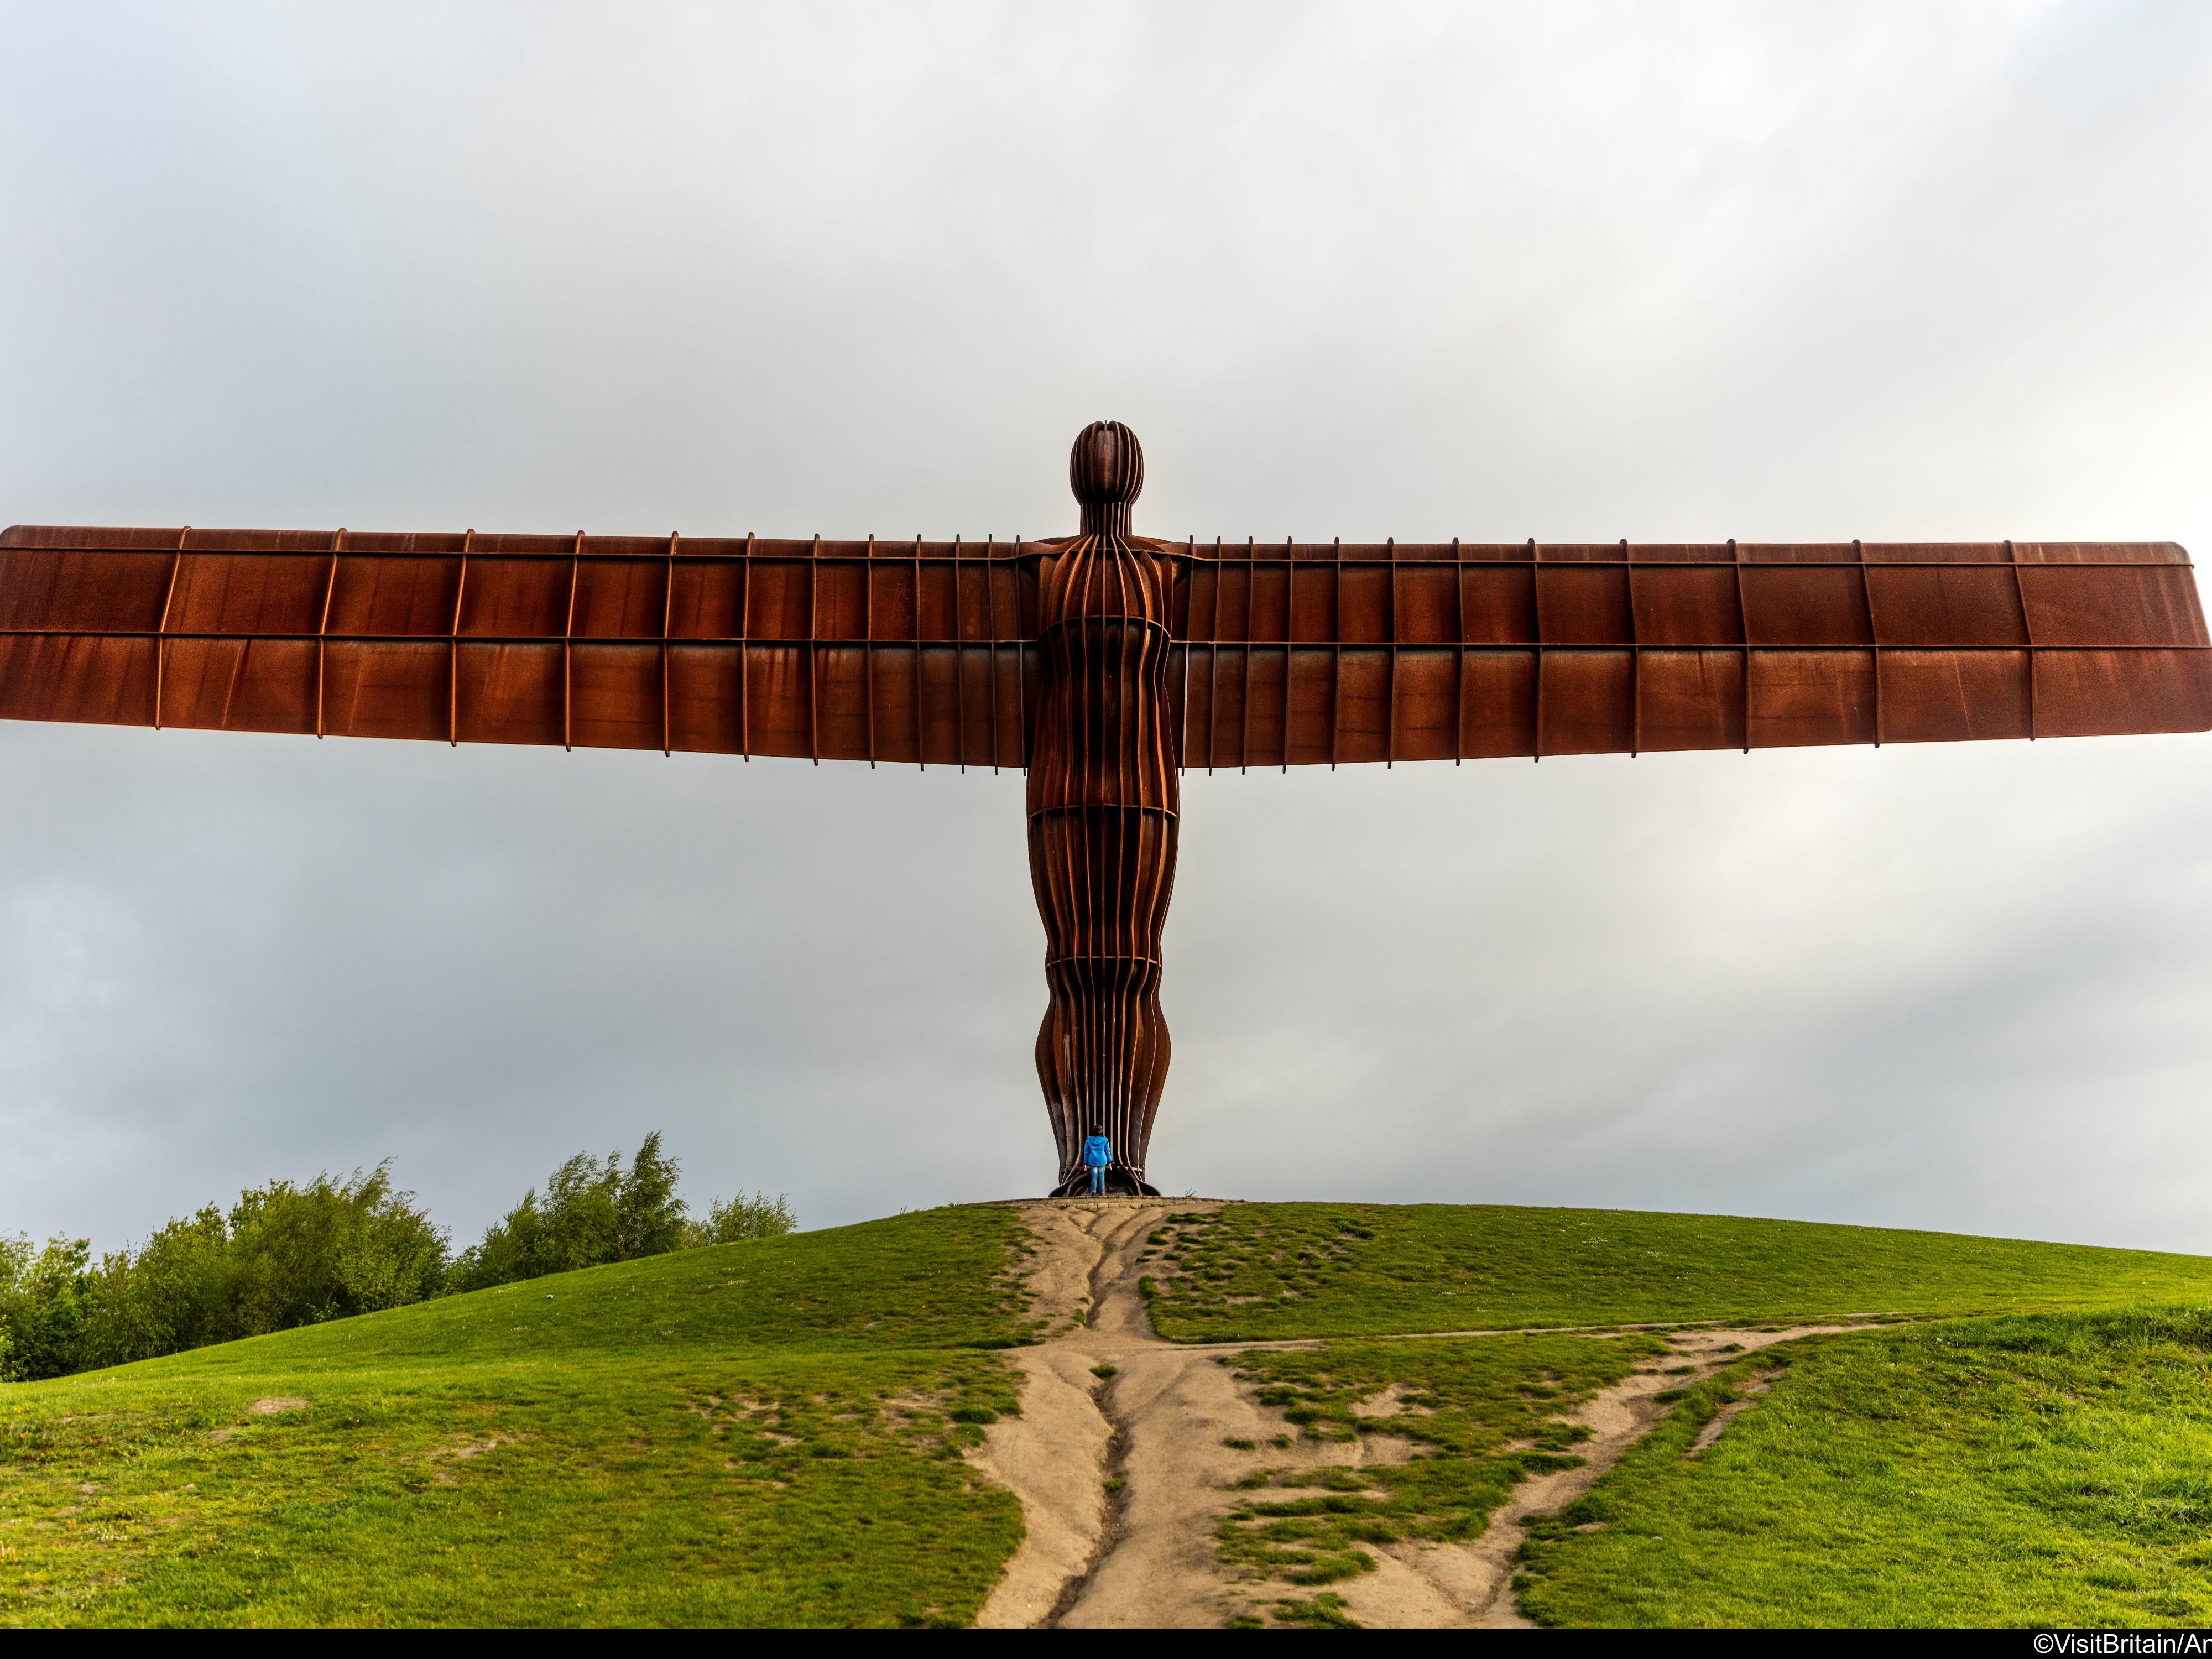 Take a 10-minute drive for some snaps of the Angel of the north